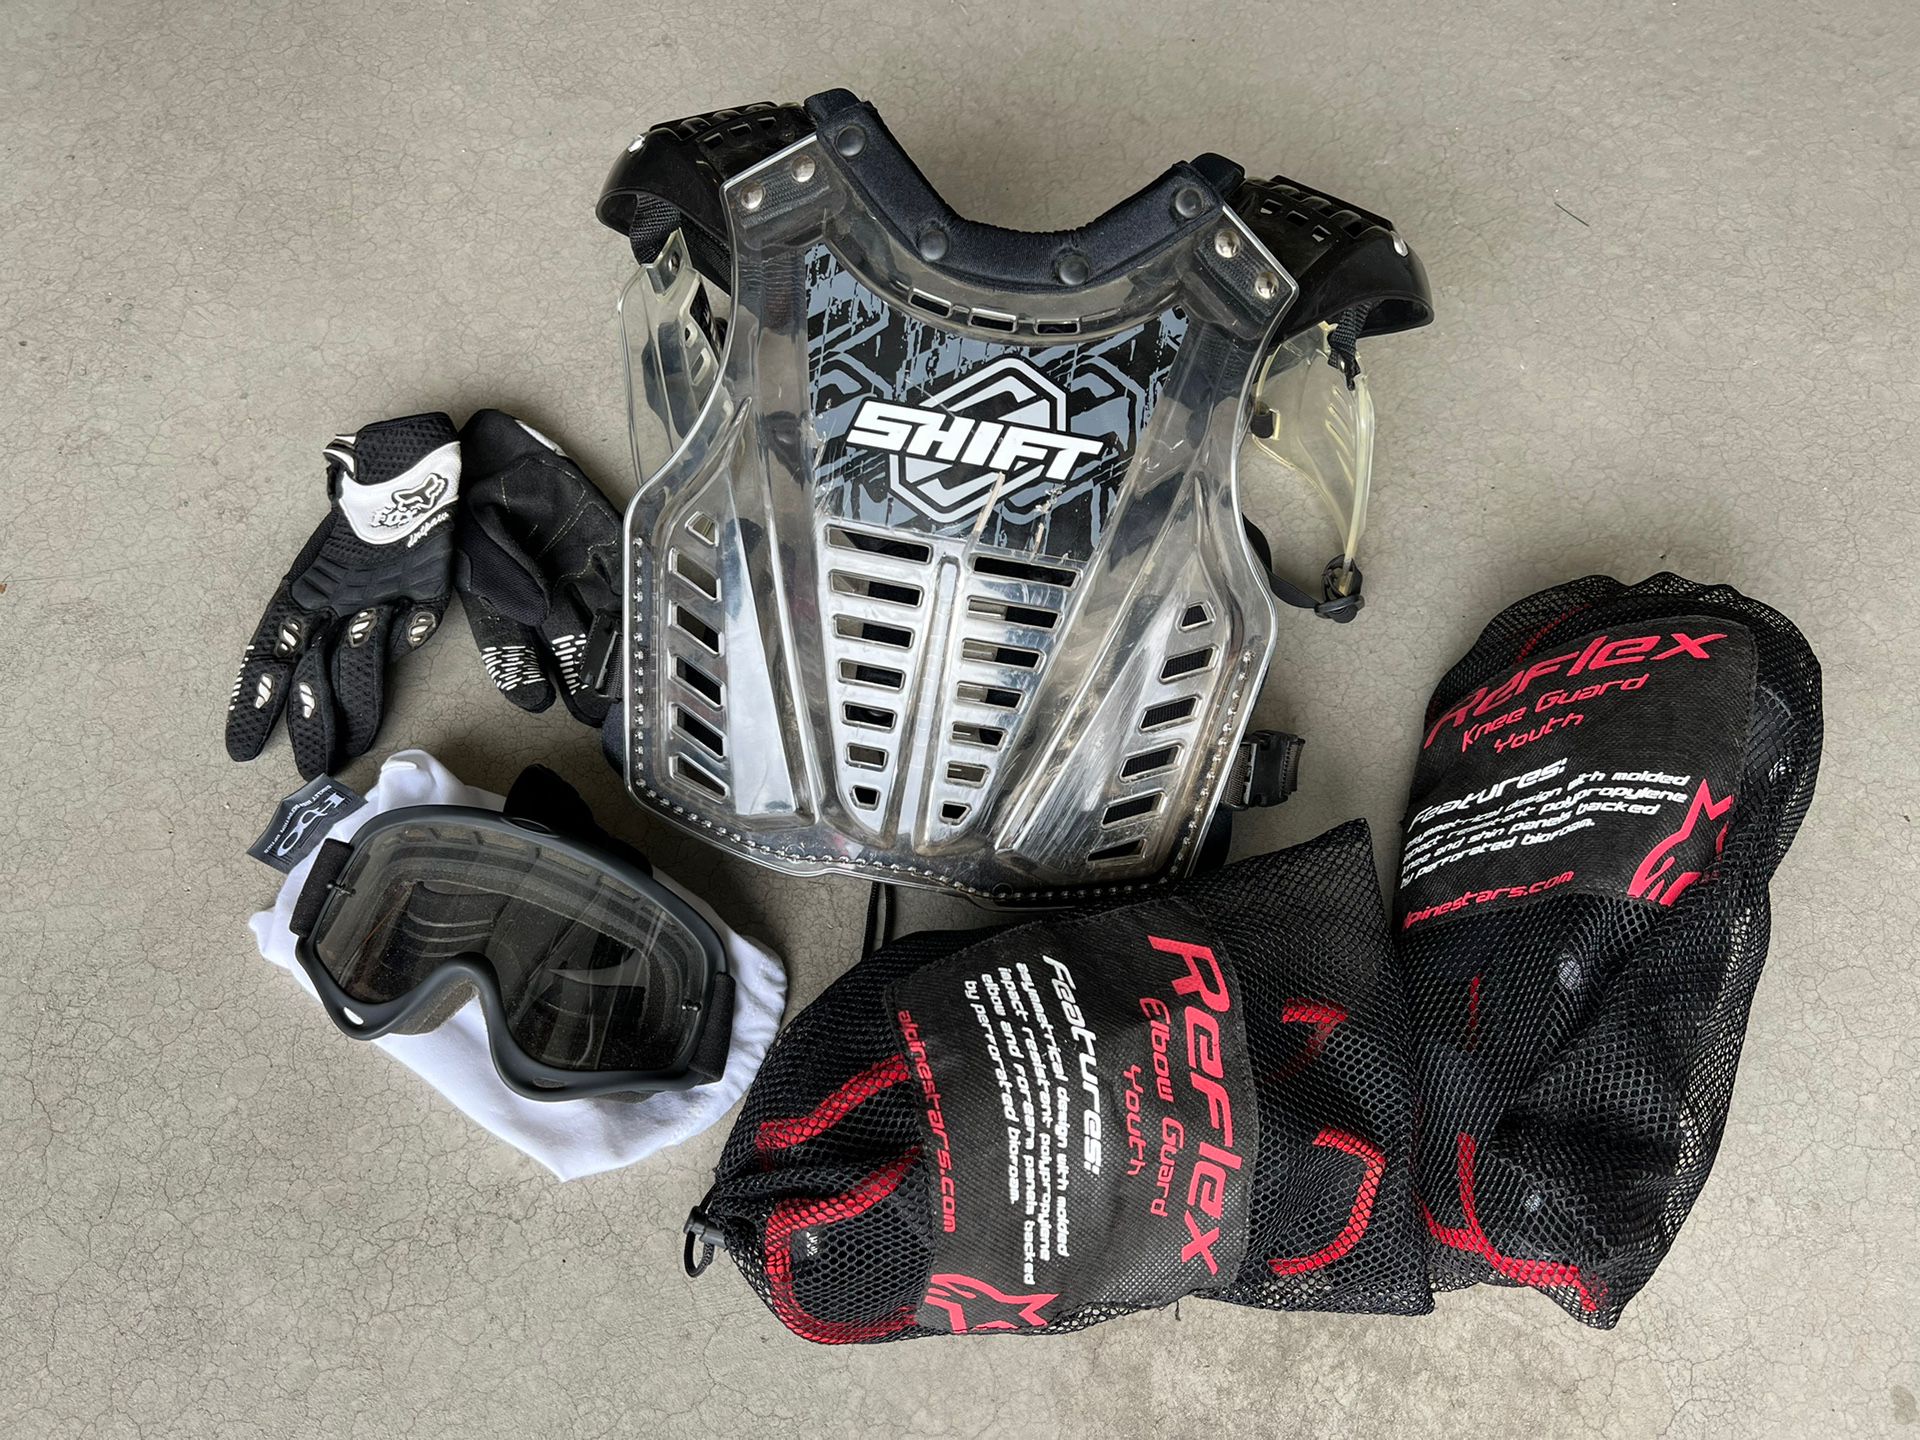 MX Gear for Youth